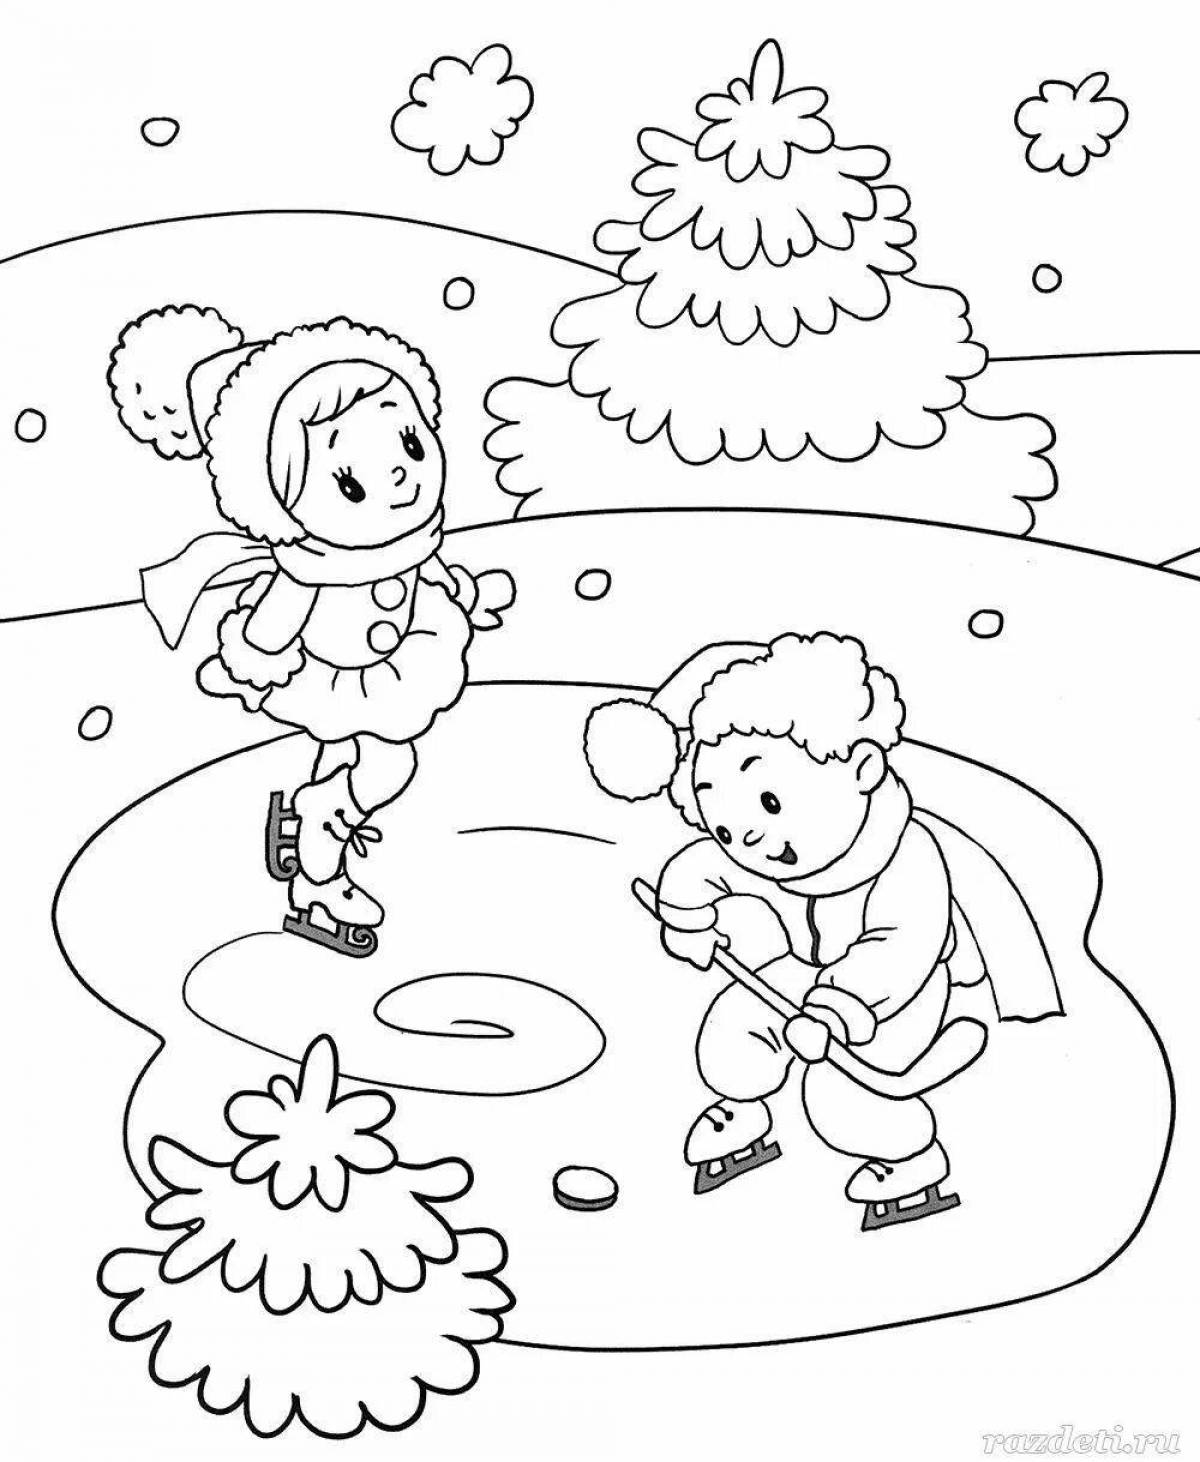 Amazing winter coloring book for kids 4-5 years old